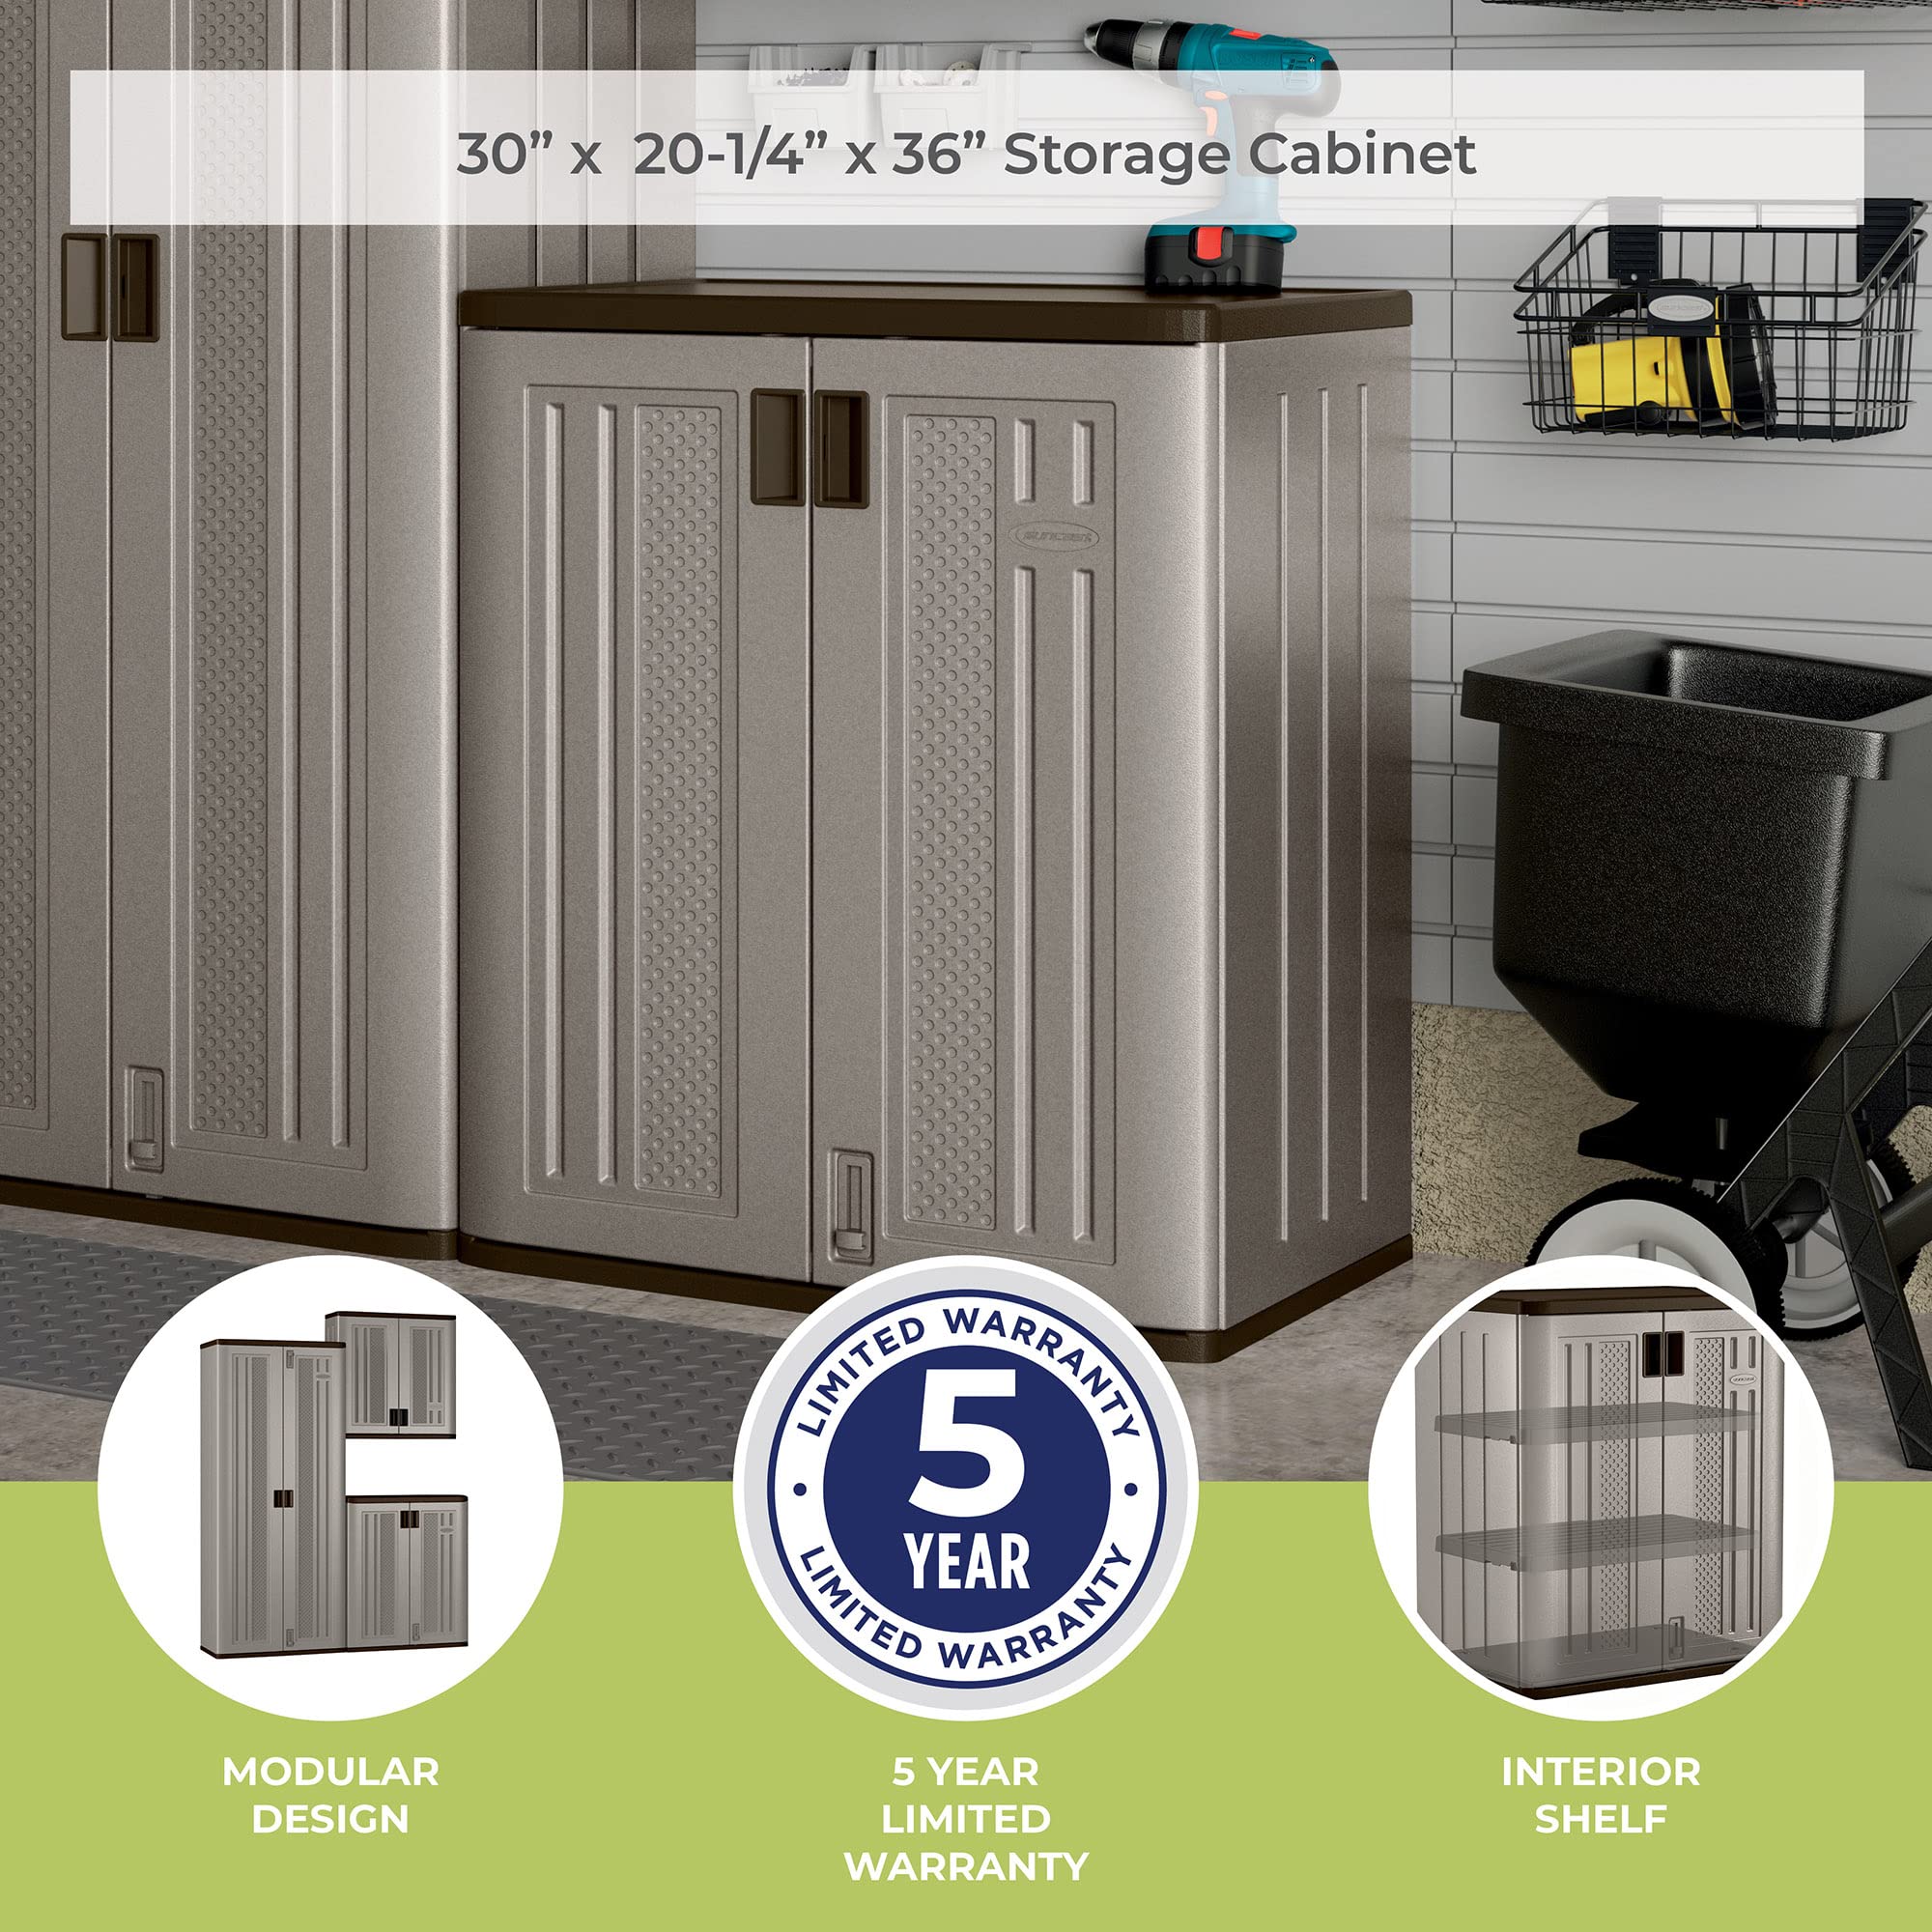 Suncast Base Resin Construction Storage-36 Garage Organizer with Shelving Holds up to 75 lbs. -Platinum Doors & Slate Top Storage Cabinet, Silver